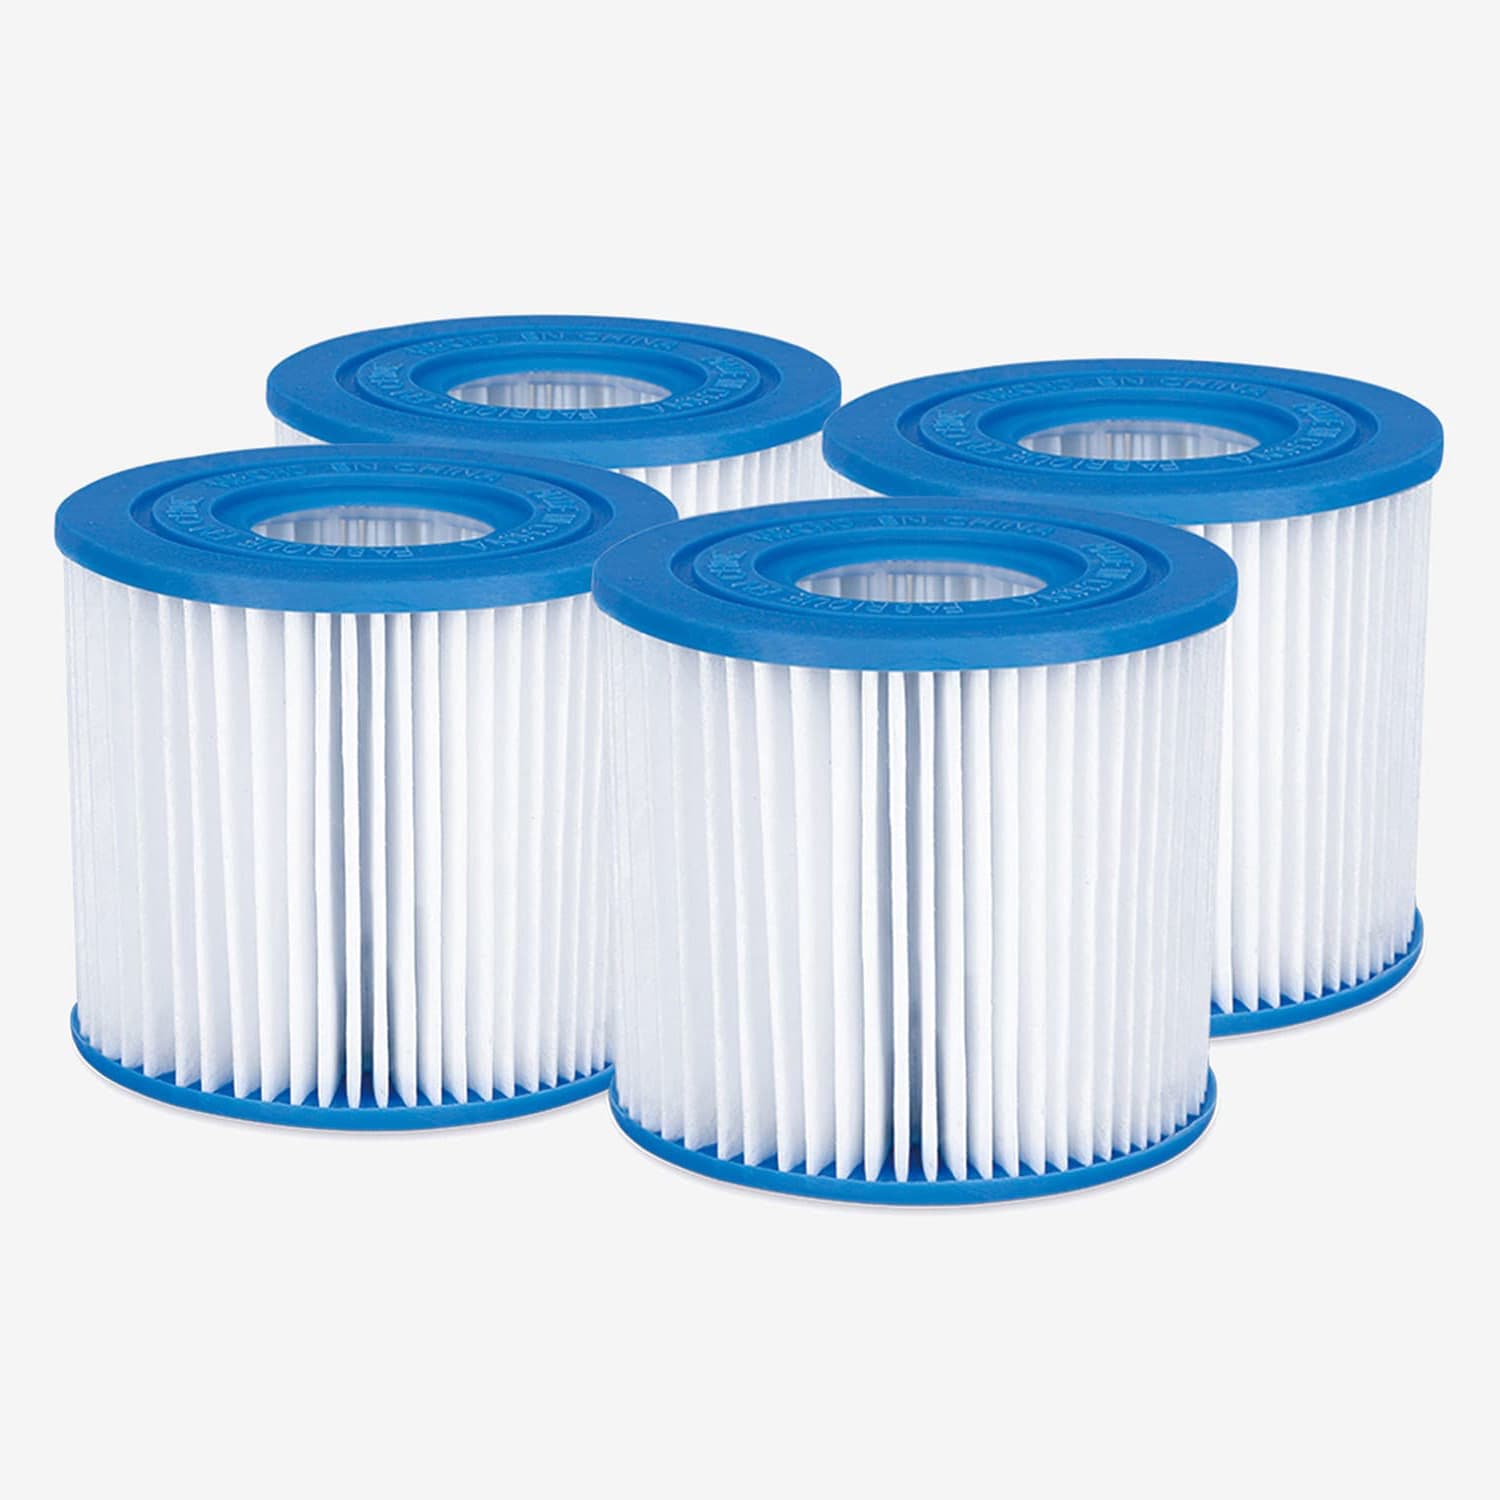 Funsicle Type D Filter Cartridge 4-pack